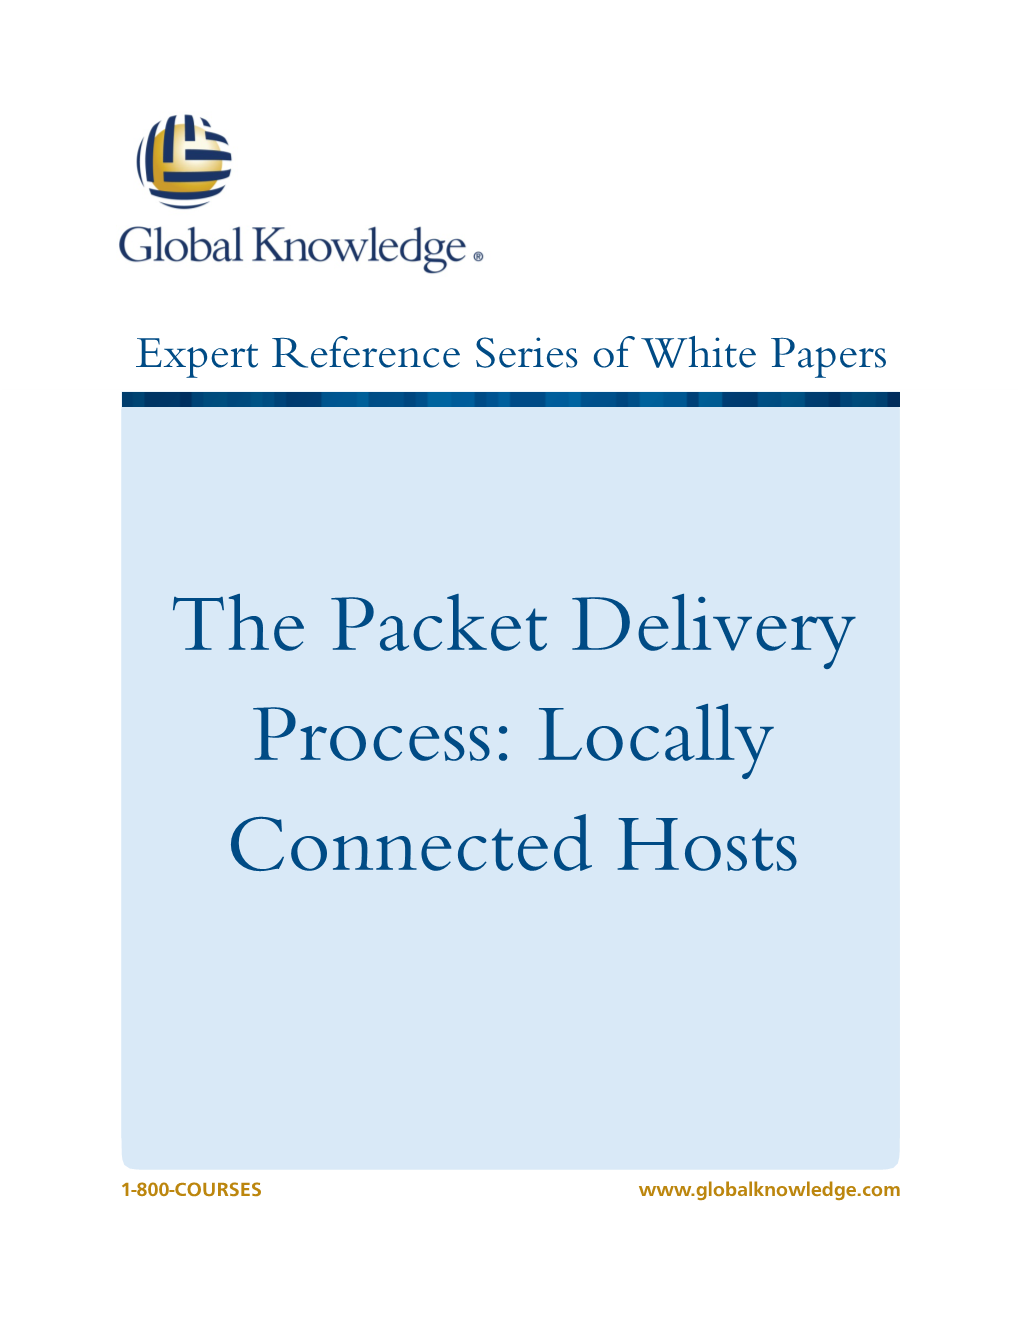 The Packet Delivery Process: Locally Connected Hosts Alan Thomas, CCNA, CCSI, Global Knowledge Instructor